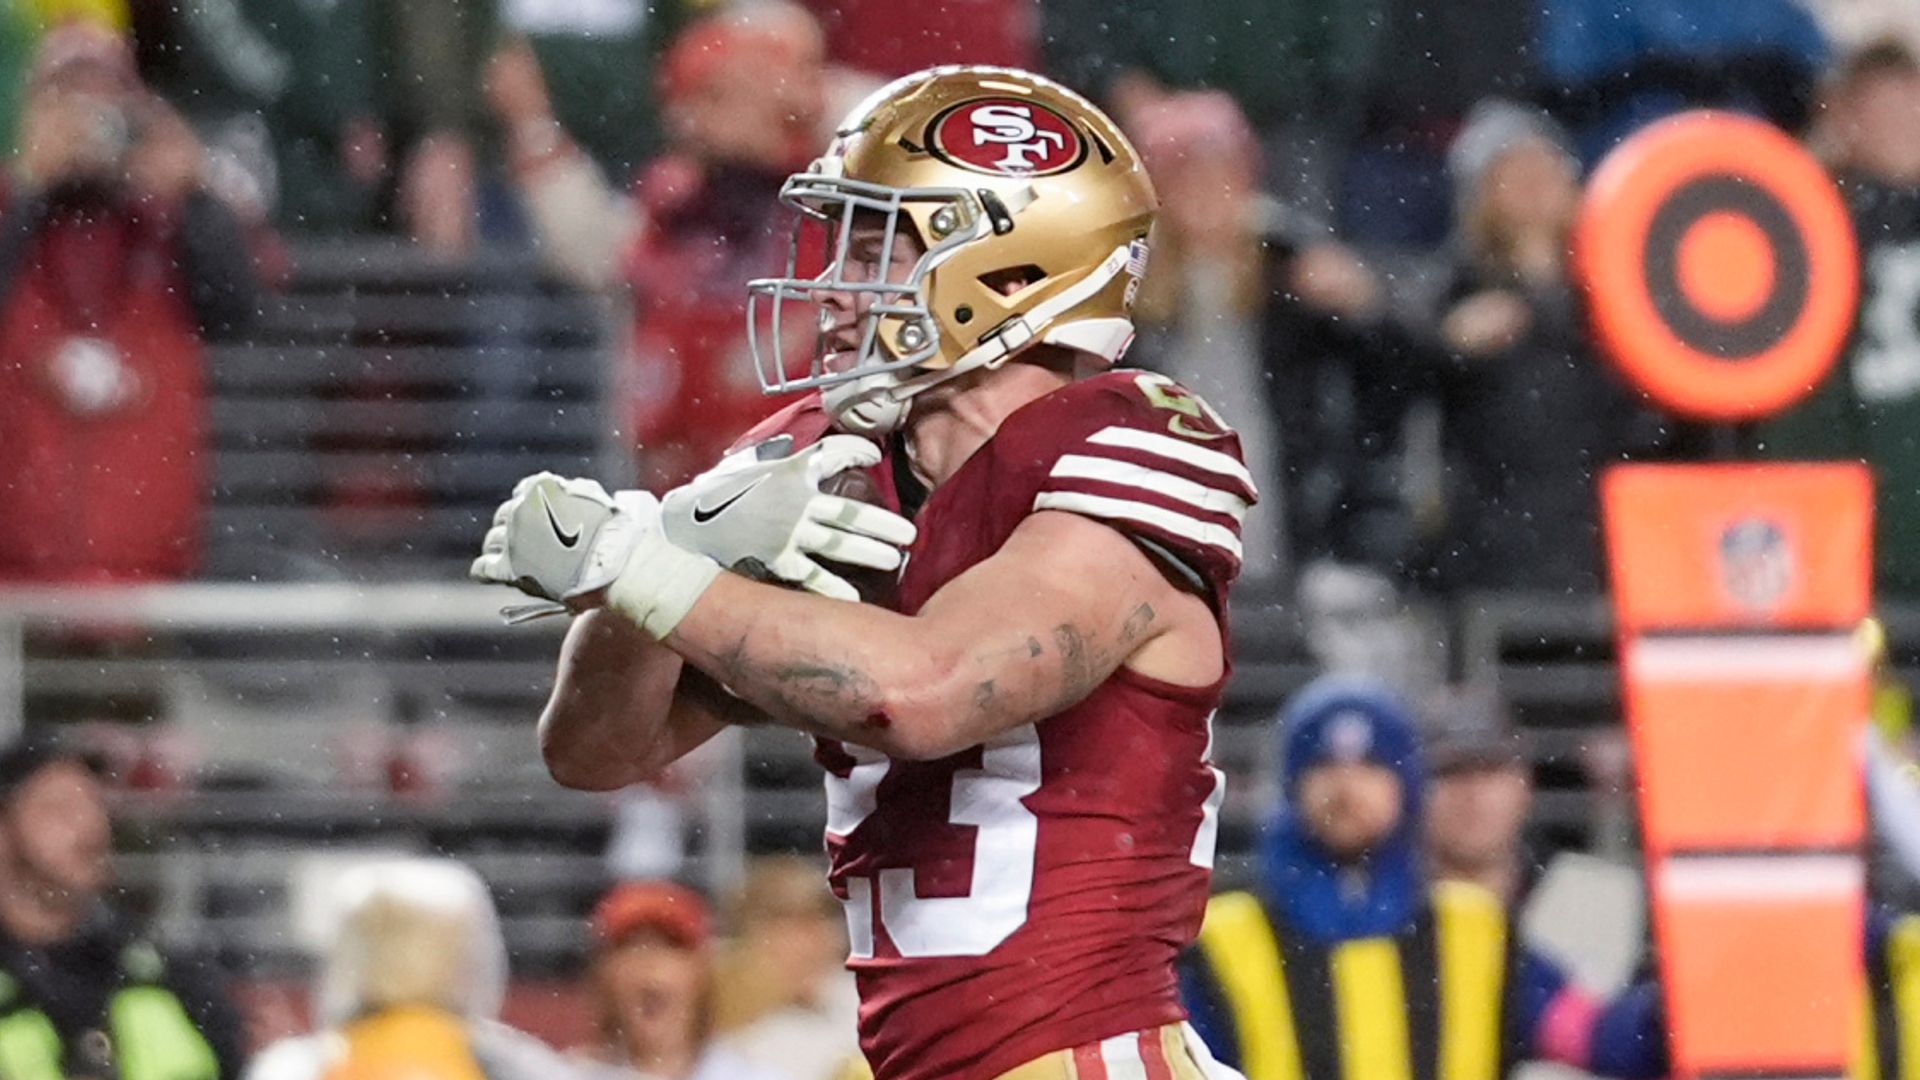 McCaffrey and Greenlaw seal thrilling win for 49ers over Packers